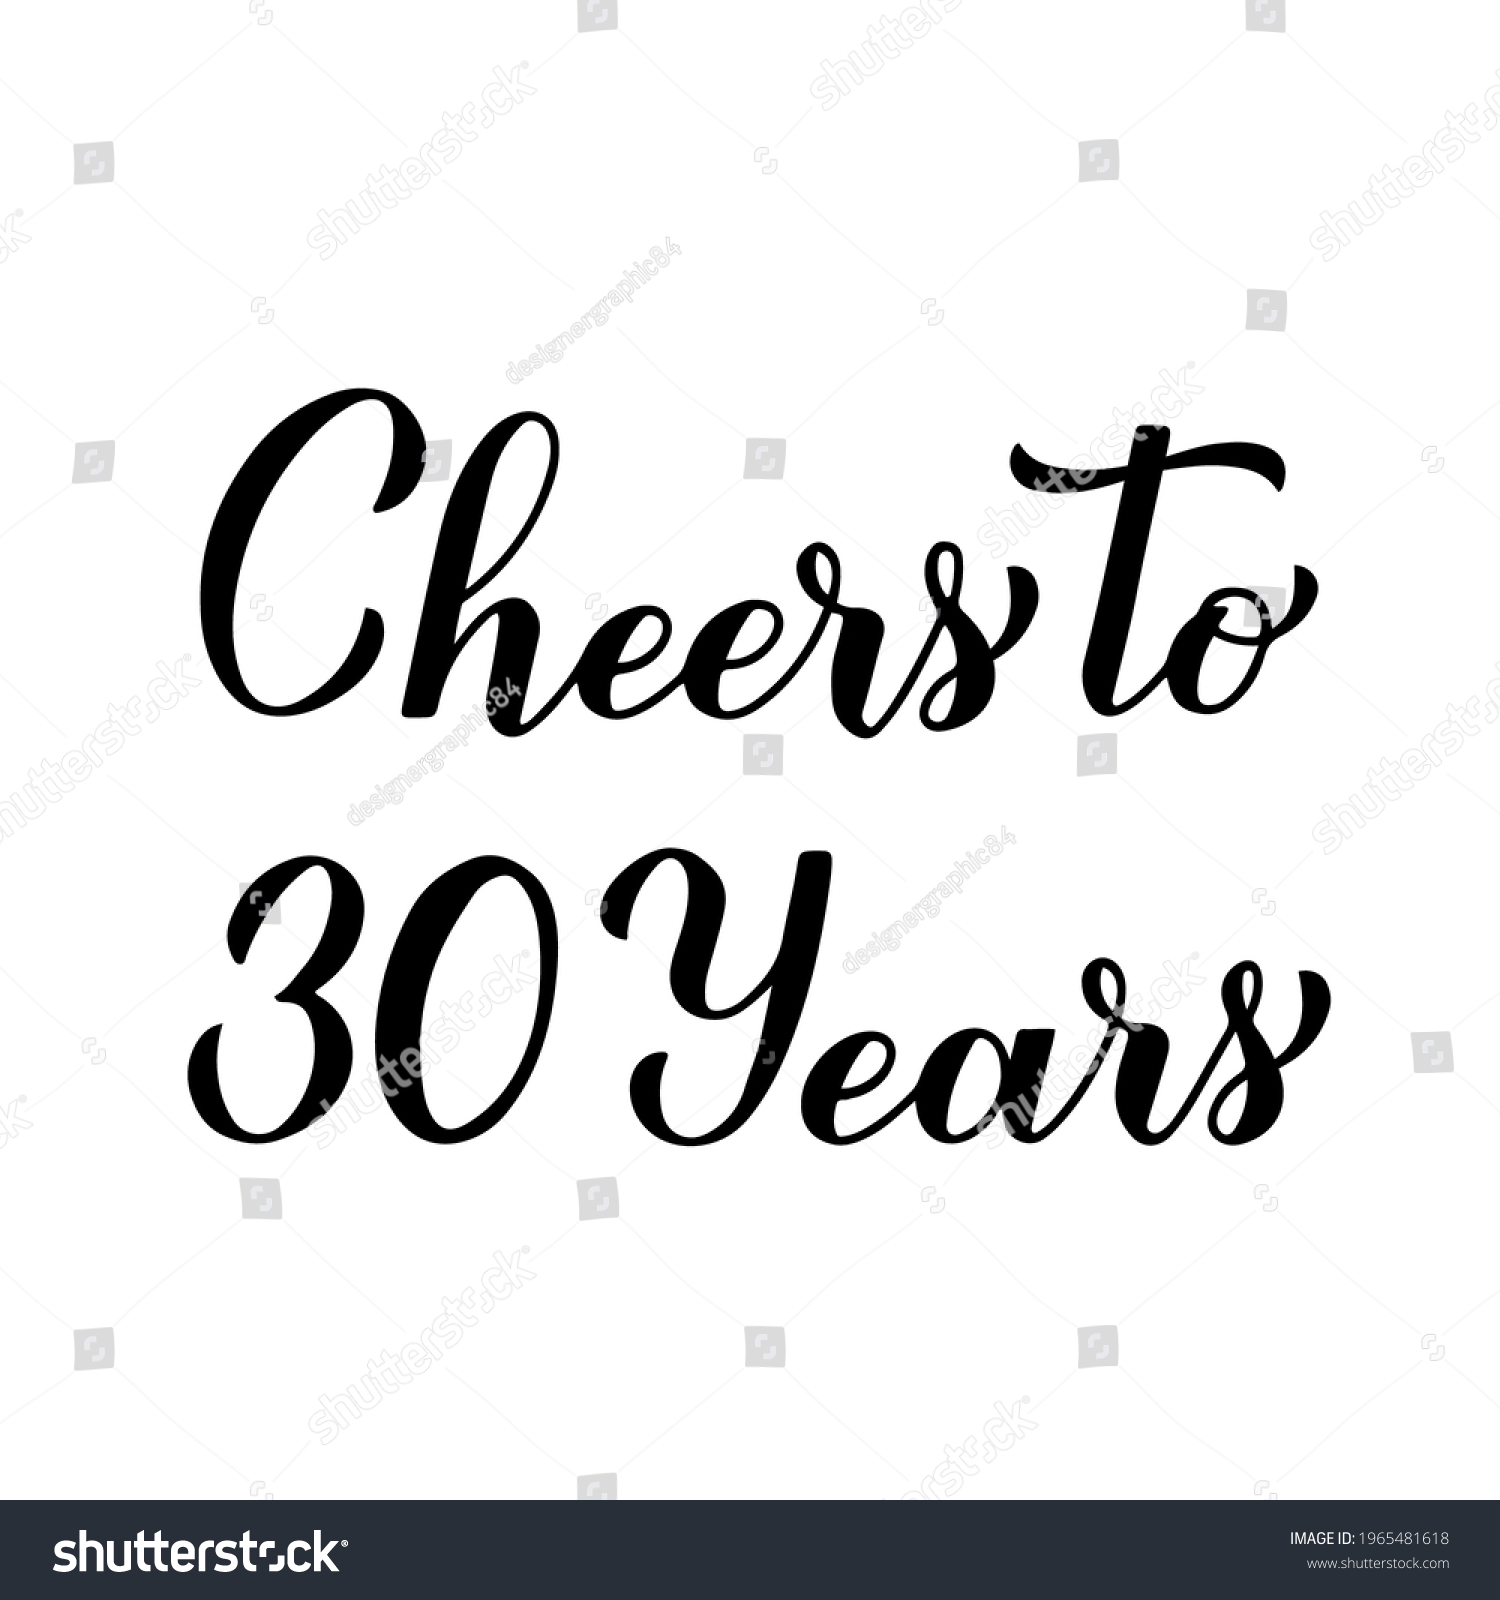 SVG of Cheers to 30 years calligraphy hand lettering. 30th Birthday or Anniversary celebration typography poster. Vector template for greeting card, banner, invitation, poster, flyer, sticker, t-shirt, etc. svg